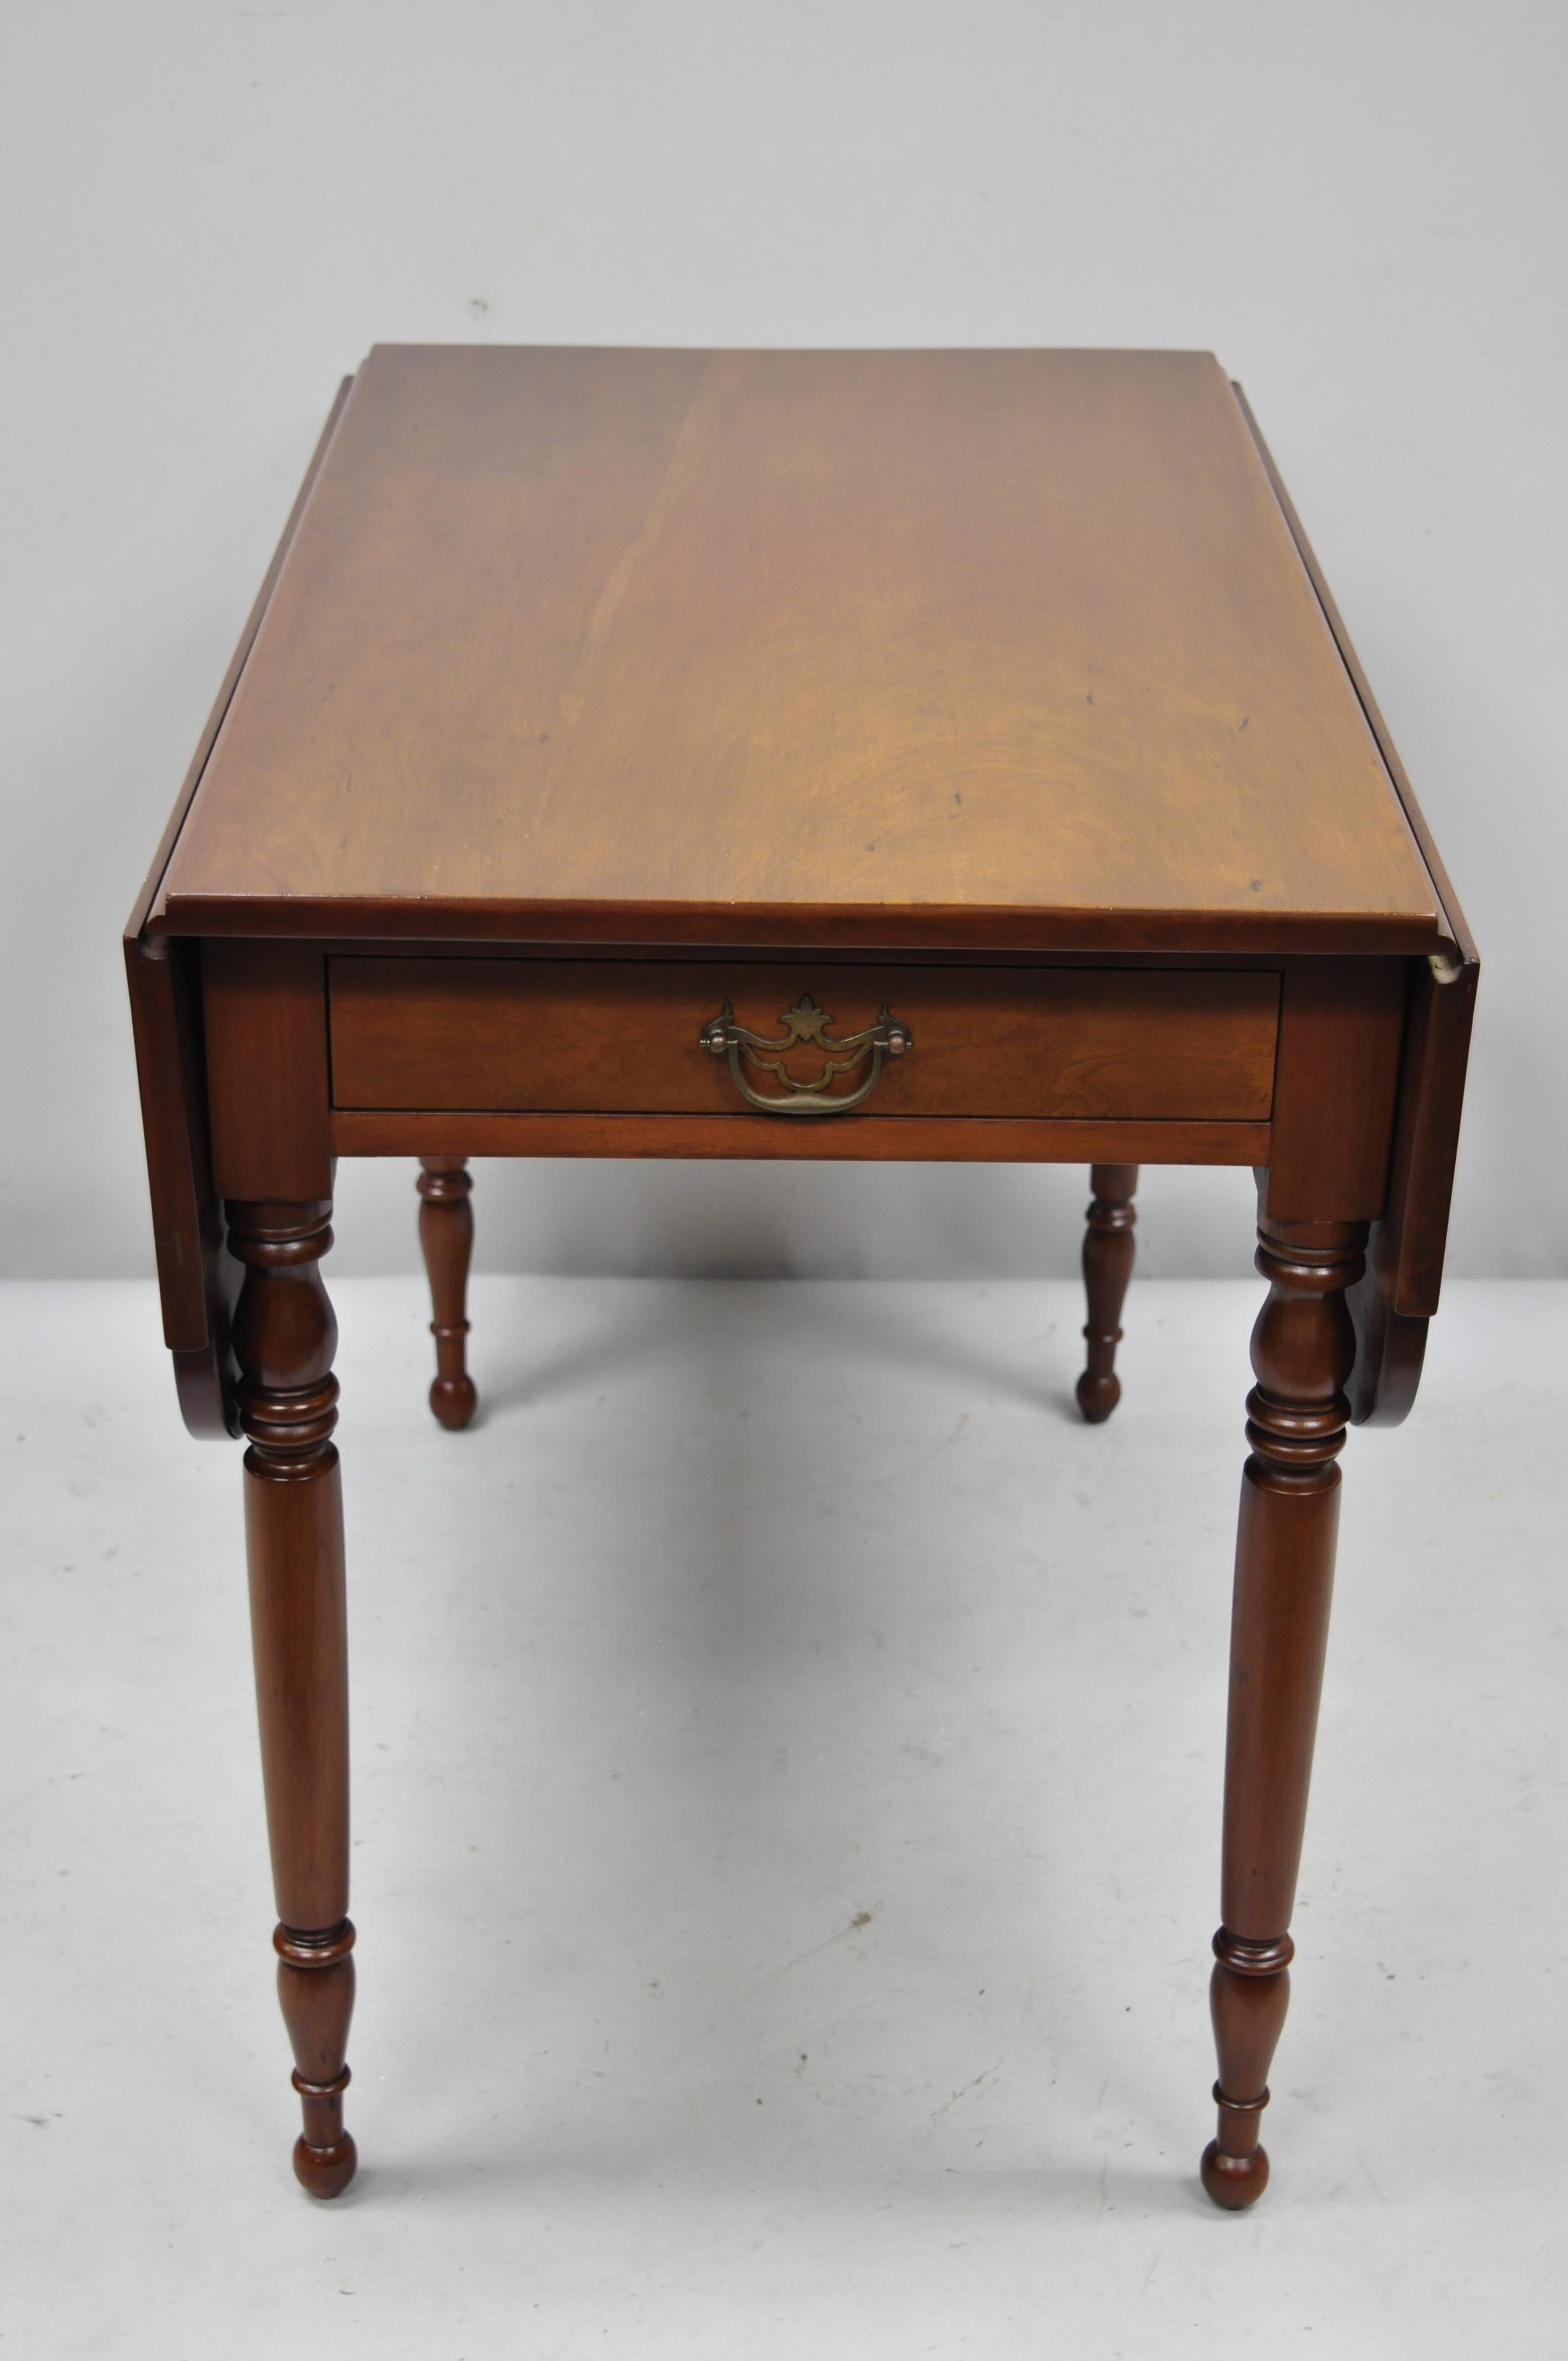 19th Century Antique Cherry Wood American Colonial Drop Leaf Pembroke Table. Item features turn carved legs, solid wood construction, beautiful wood grain, nicely carved details,1 dovetailed drawer, solid brass hardware, very nice antique item.